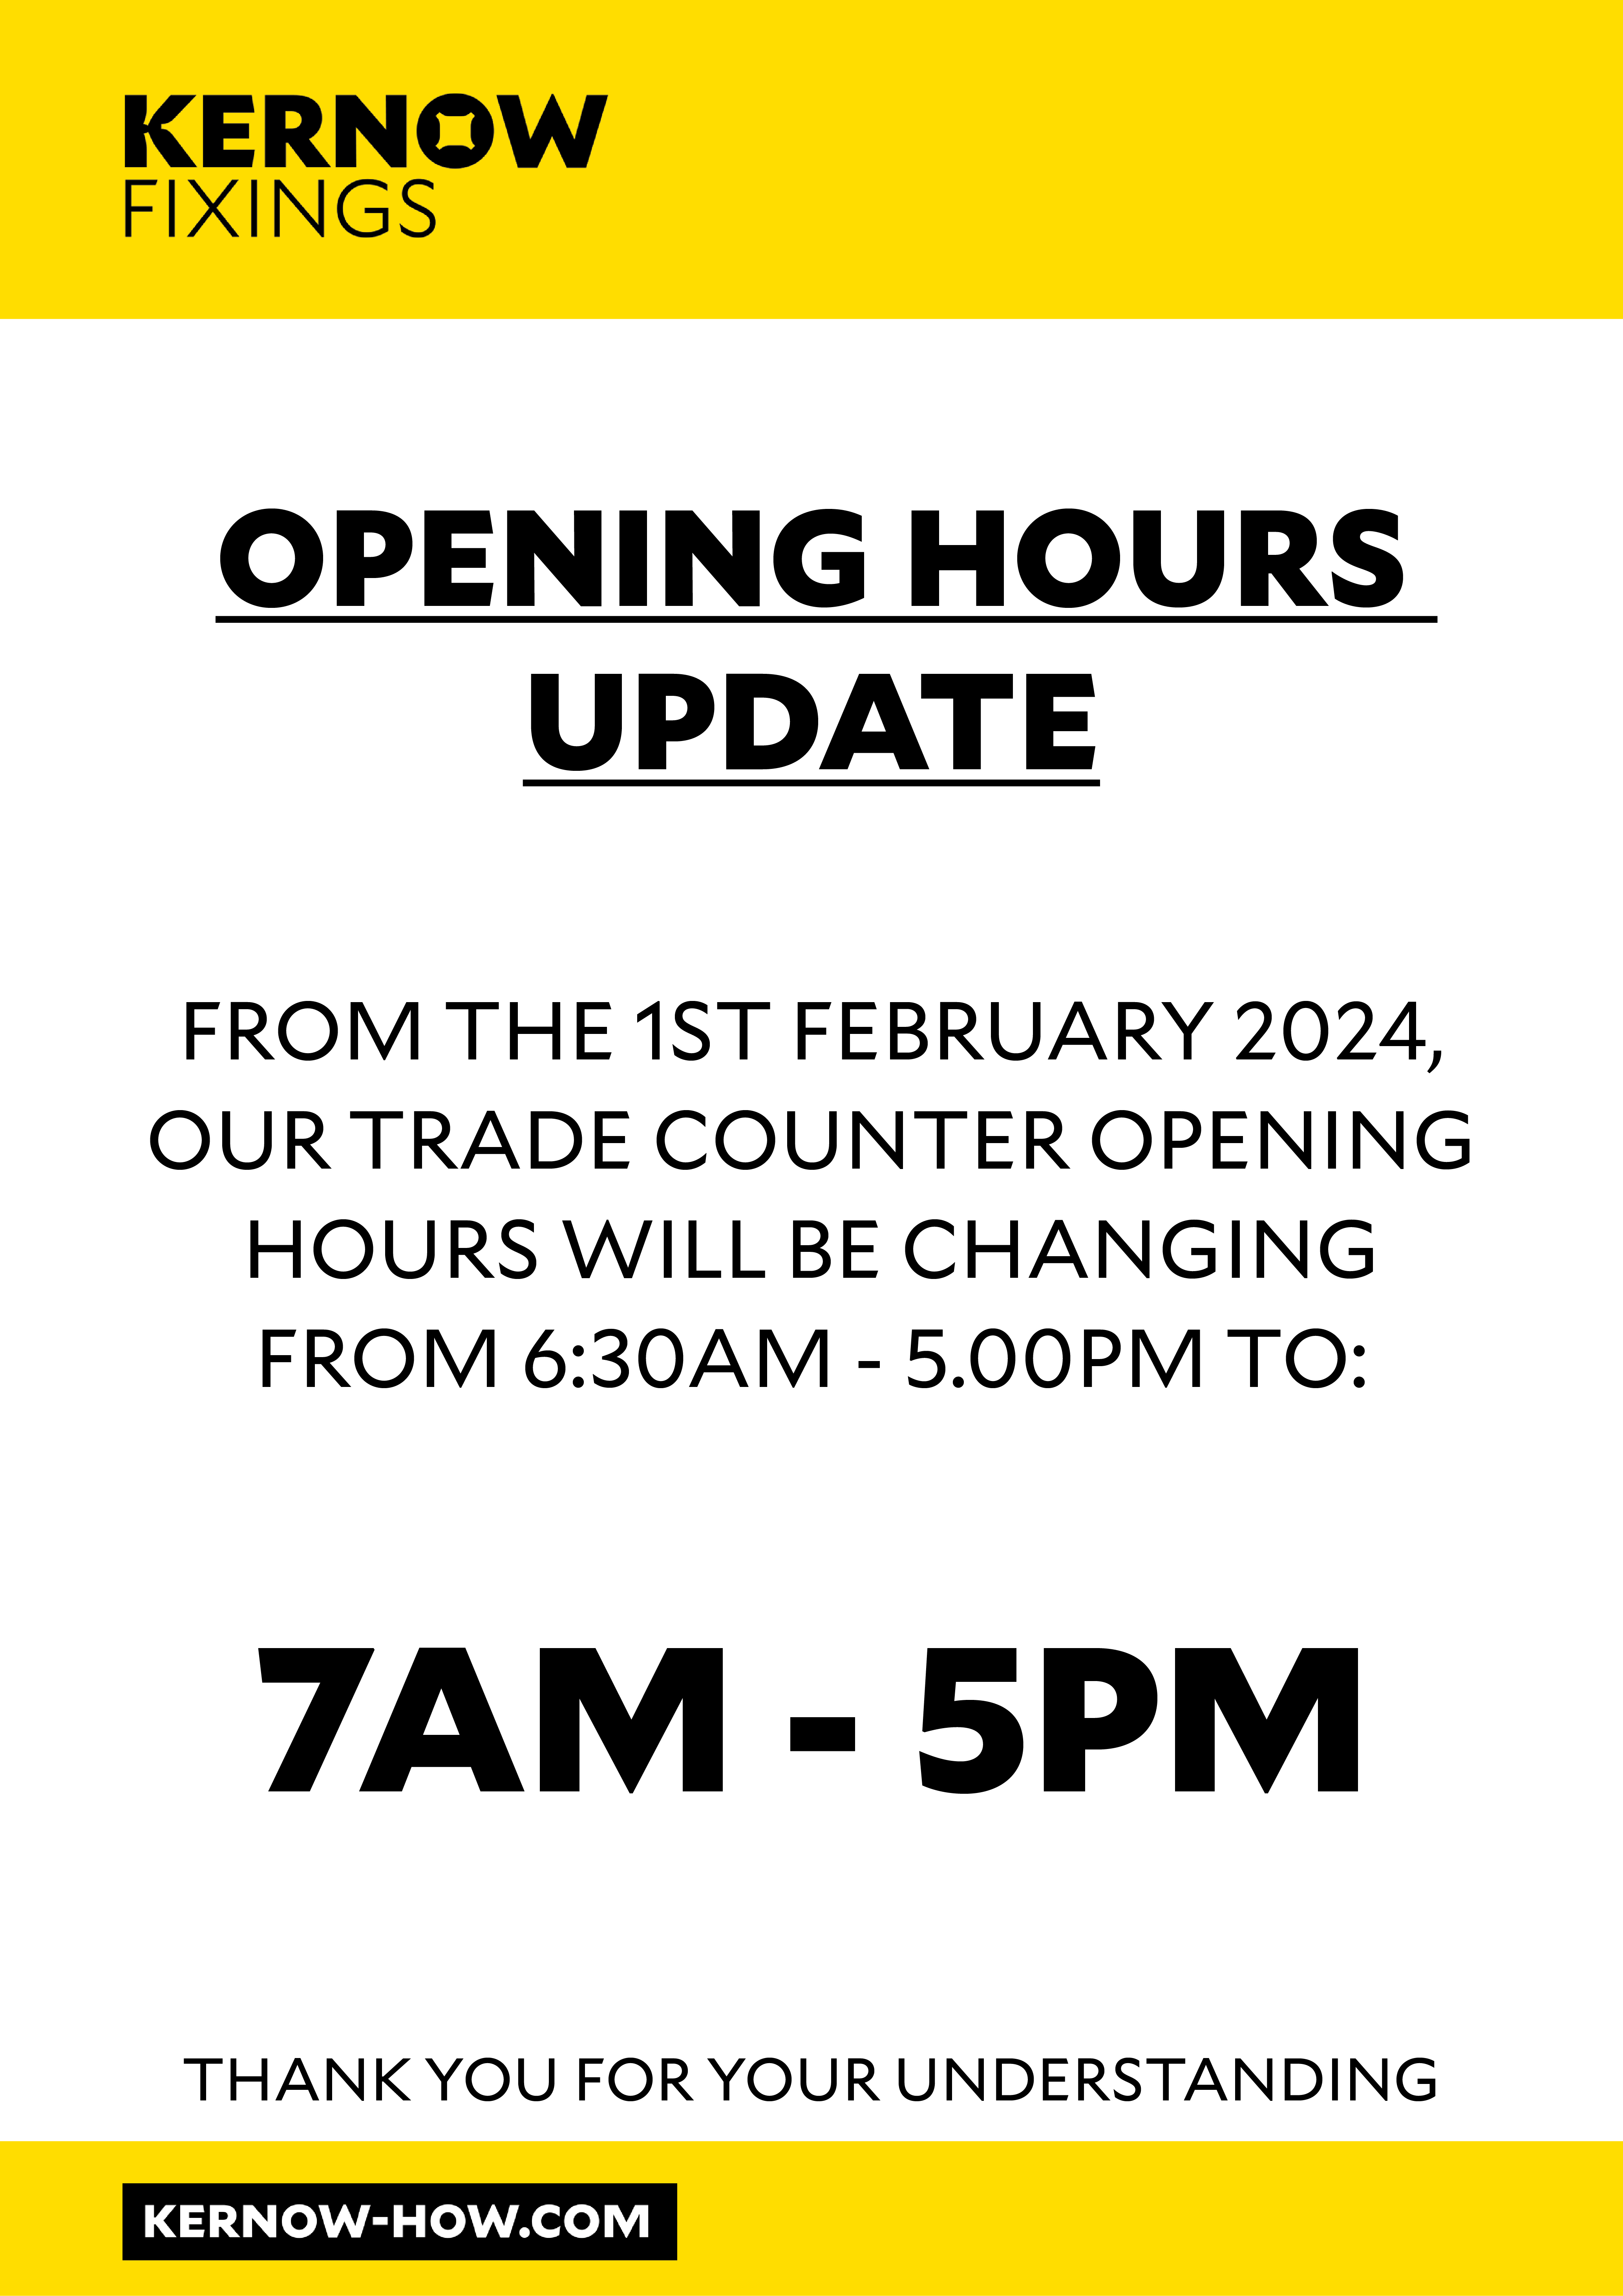 Trade Counter Opening Hours